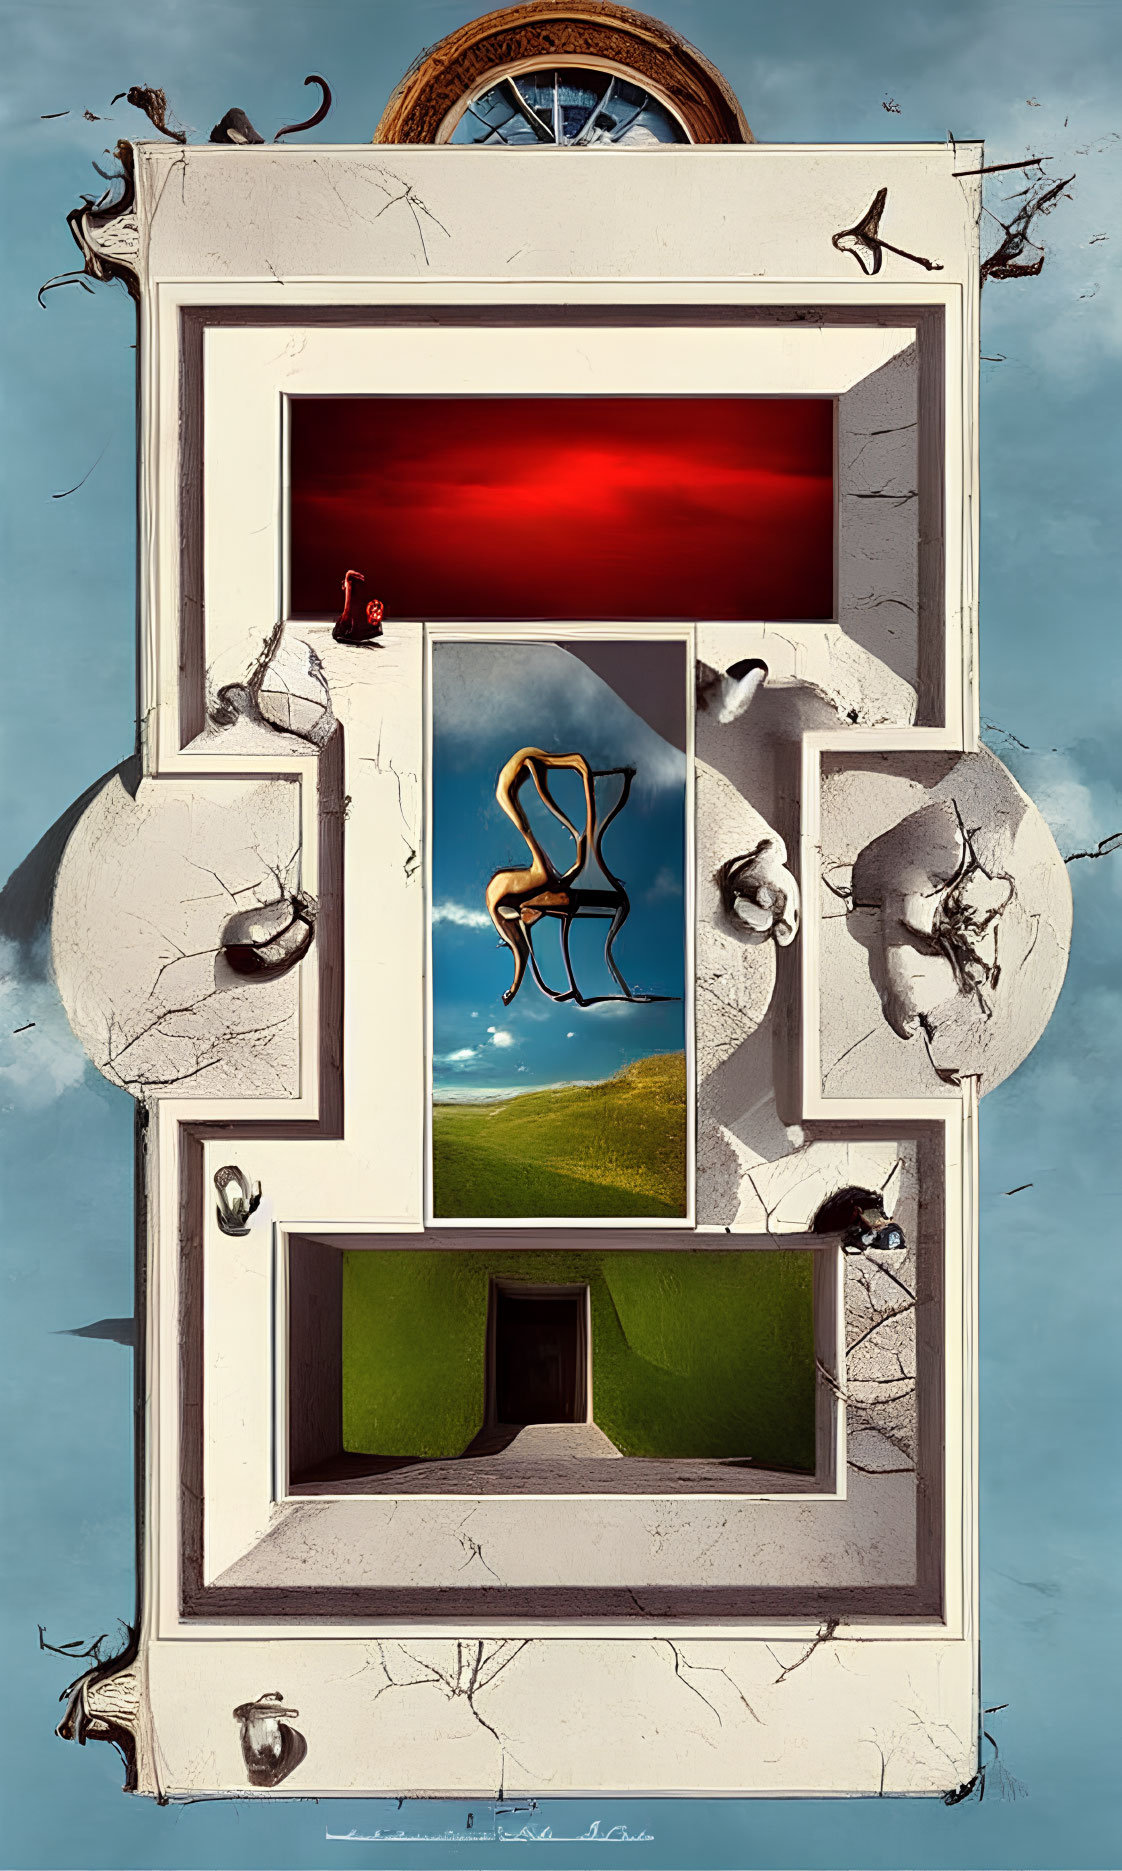 Vertical Surrealist Artwork Featuring Windows, Chairs, Doors, Climbing and Falling Figures